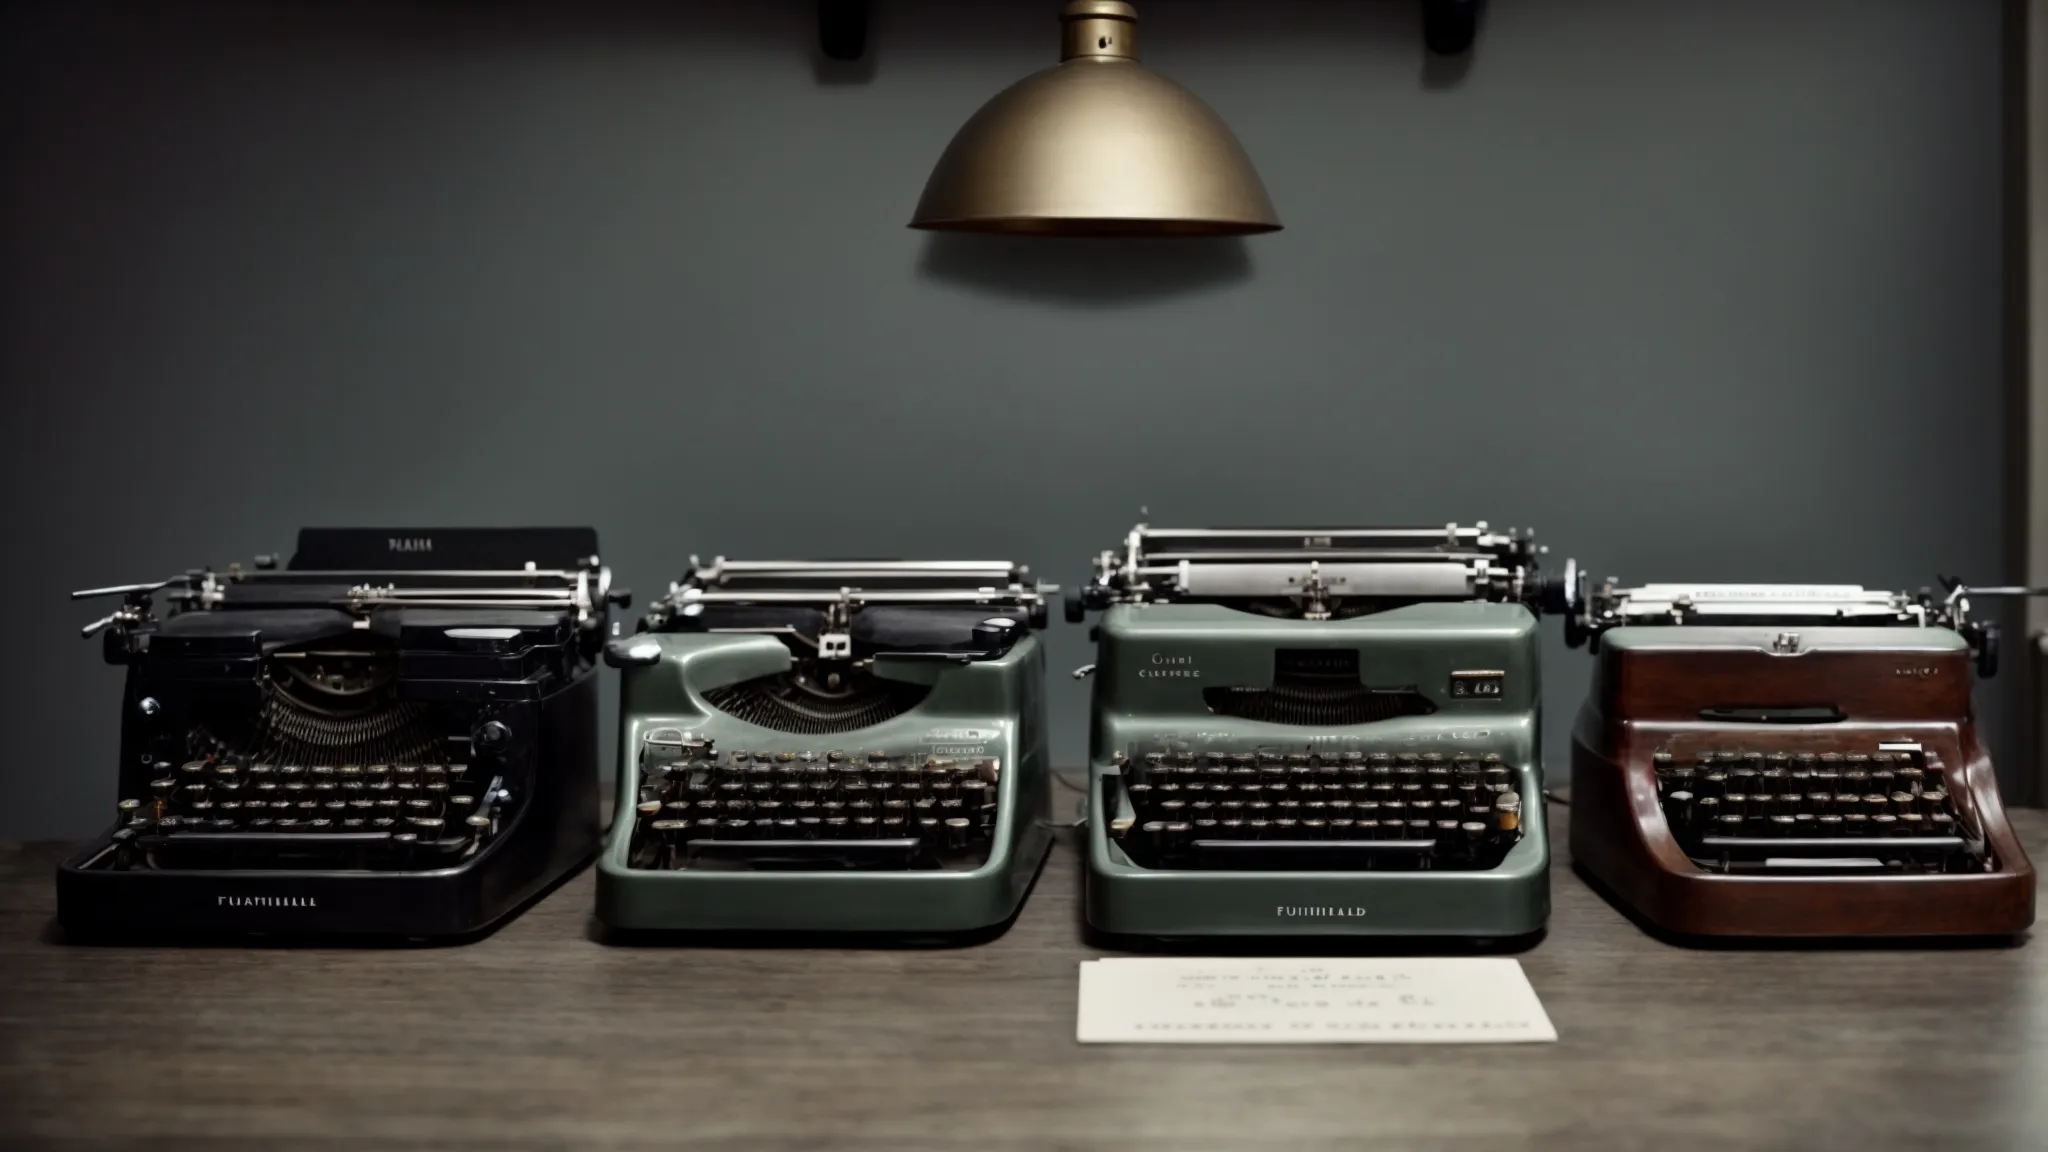 a diverse collection of typewriters on a table, each poised to compose stories with distinctive styles.